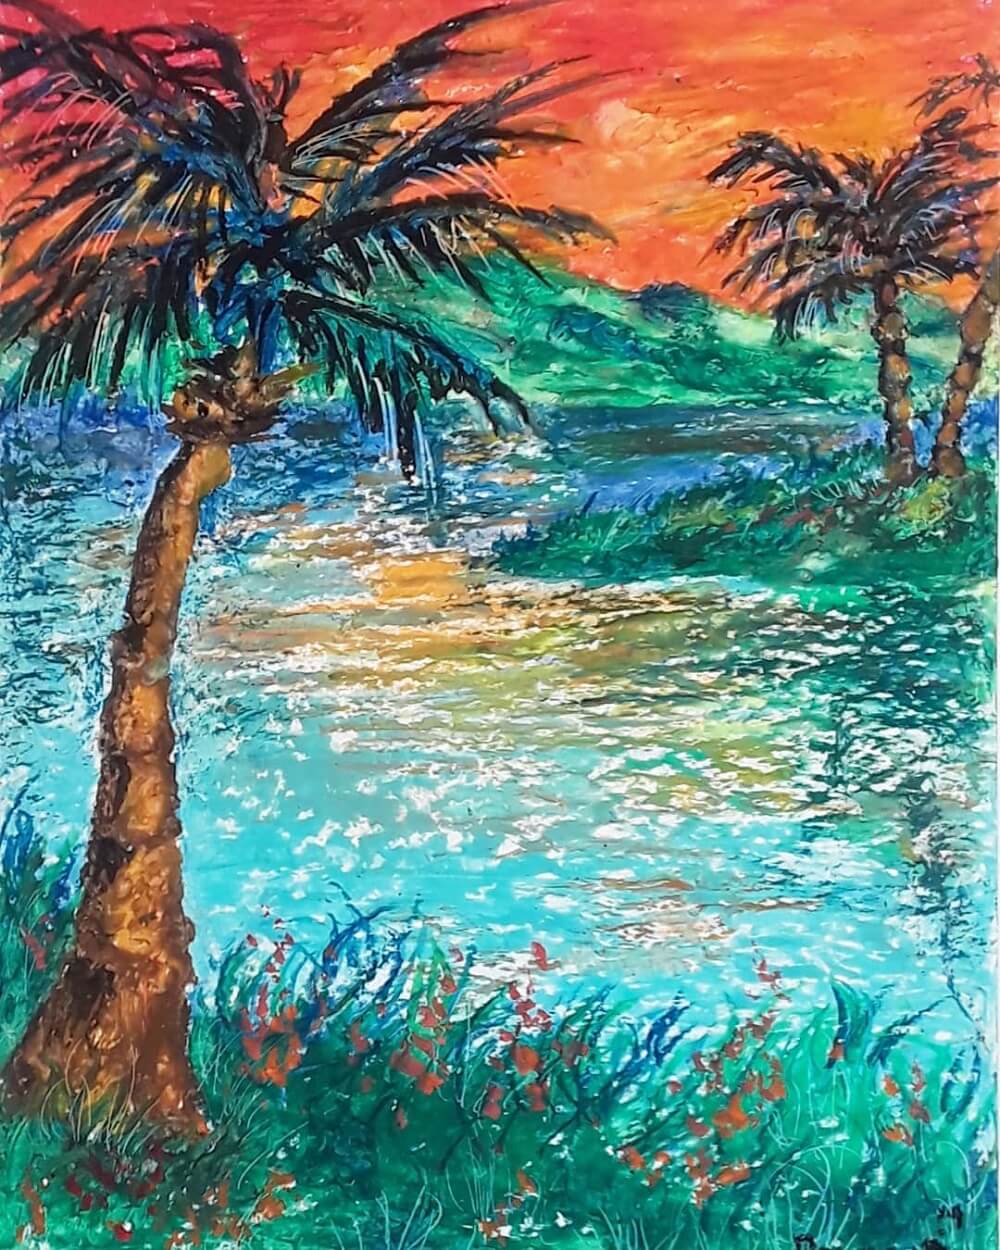 Tropical beach drawn in oil pastels with an orange sunset and sun reflecting on the sea.